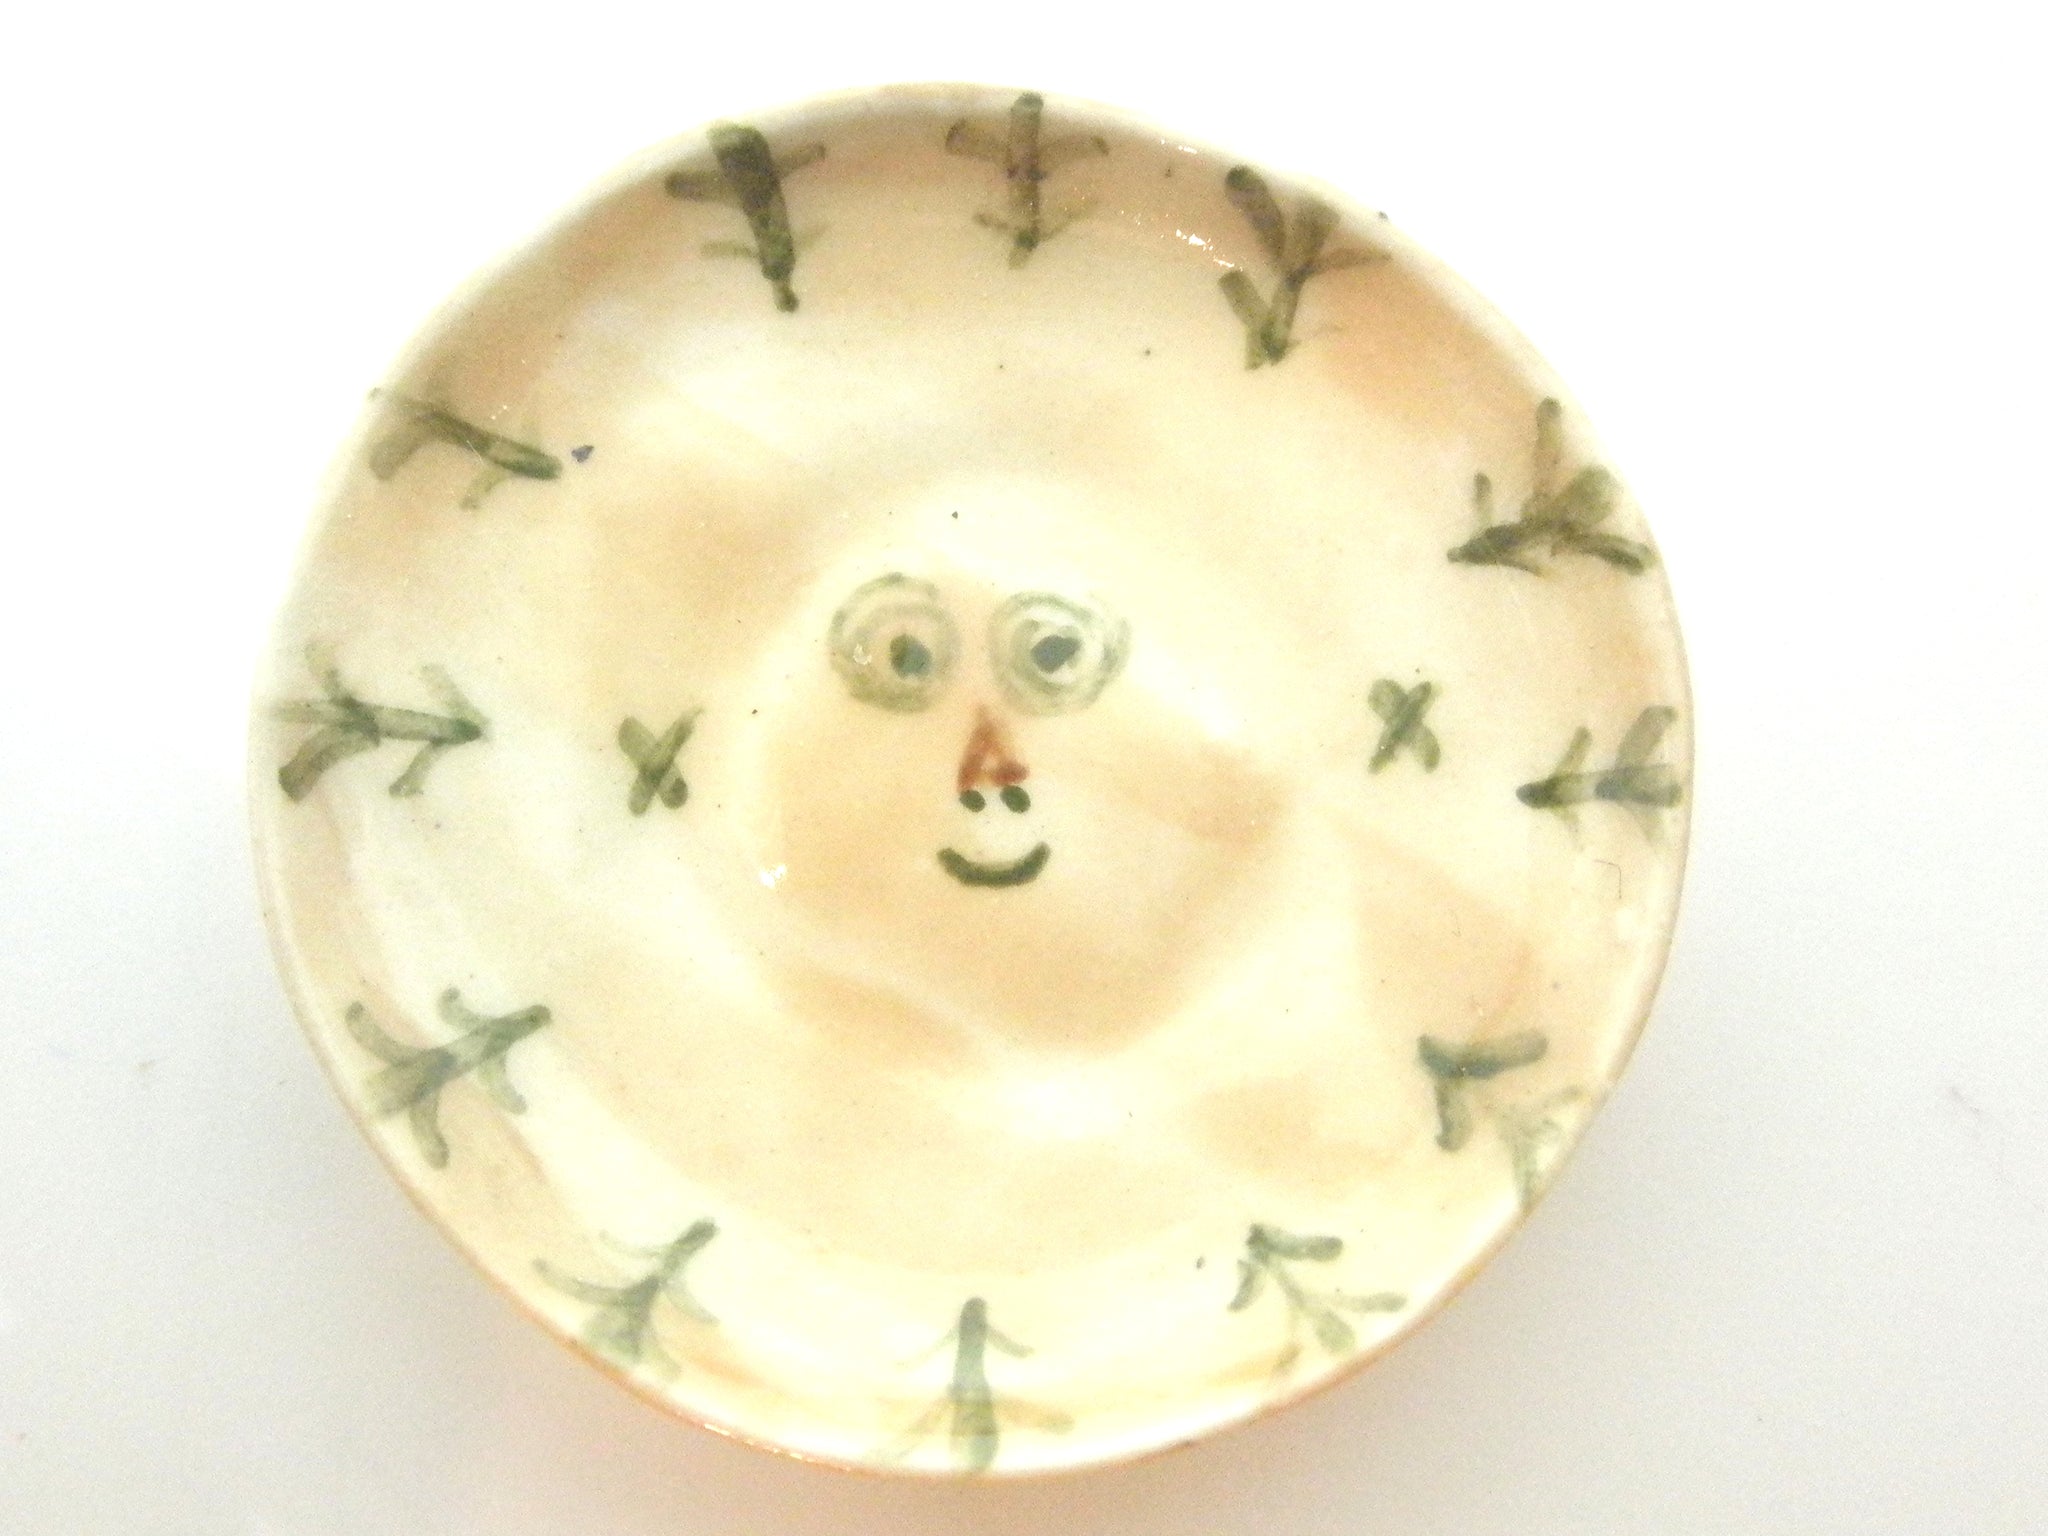 Miniature Picasso inspired ceramic dish - face with greenery